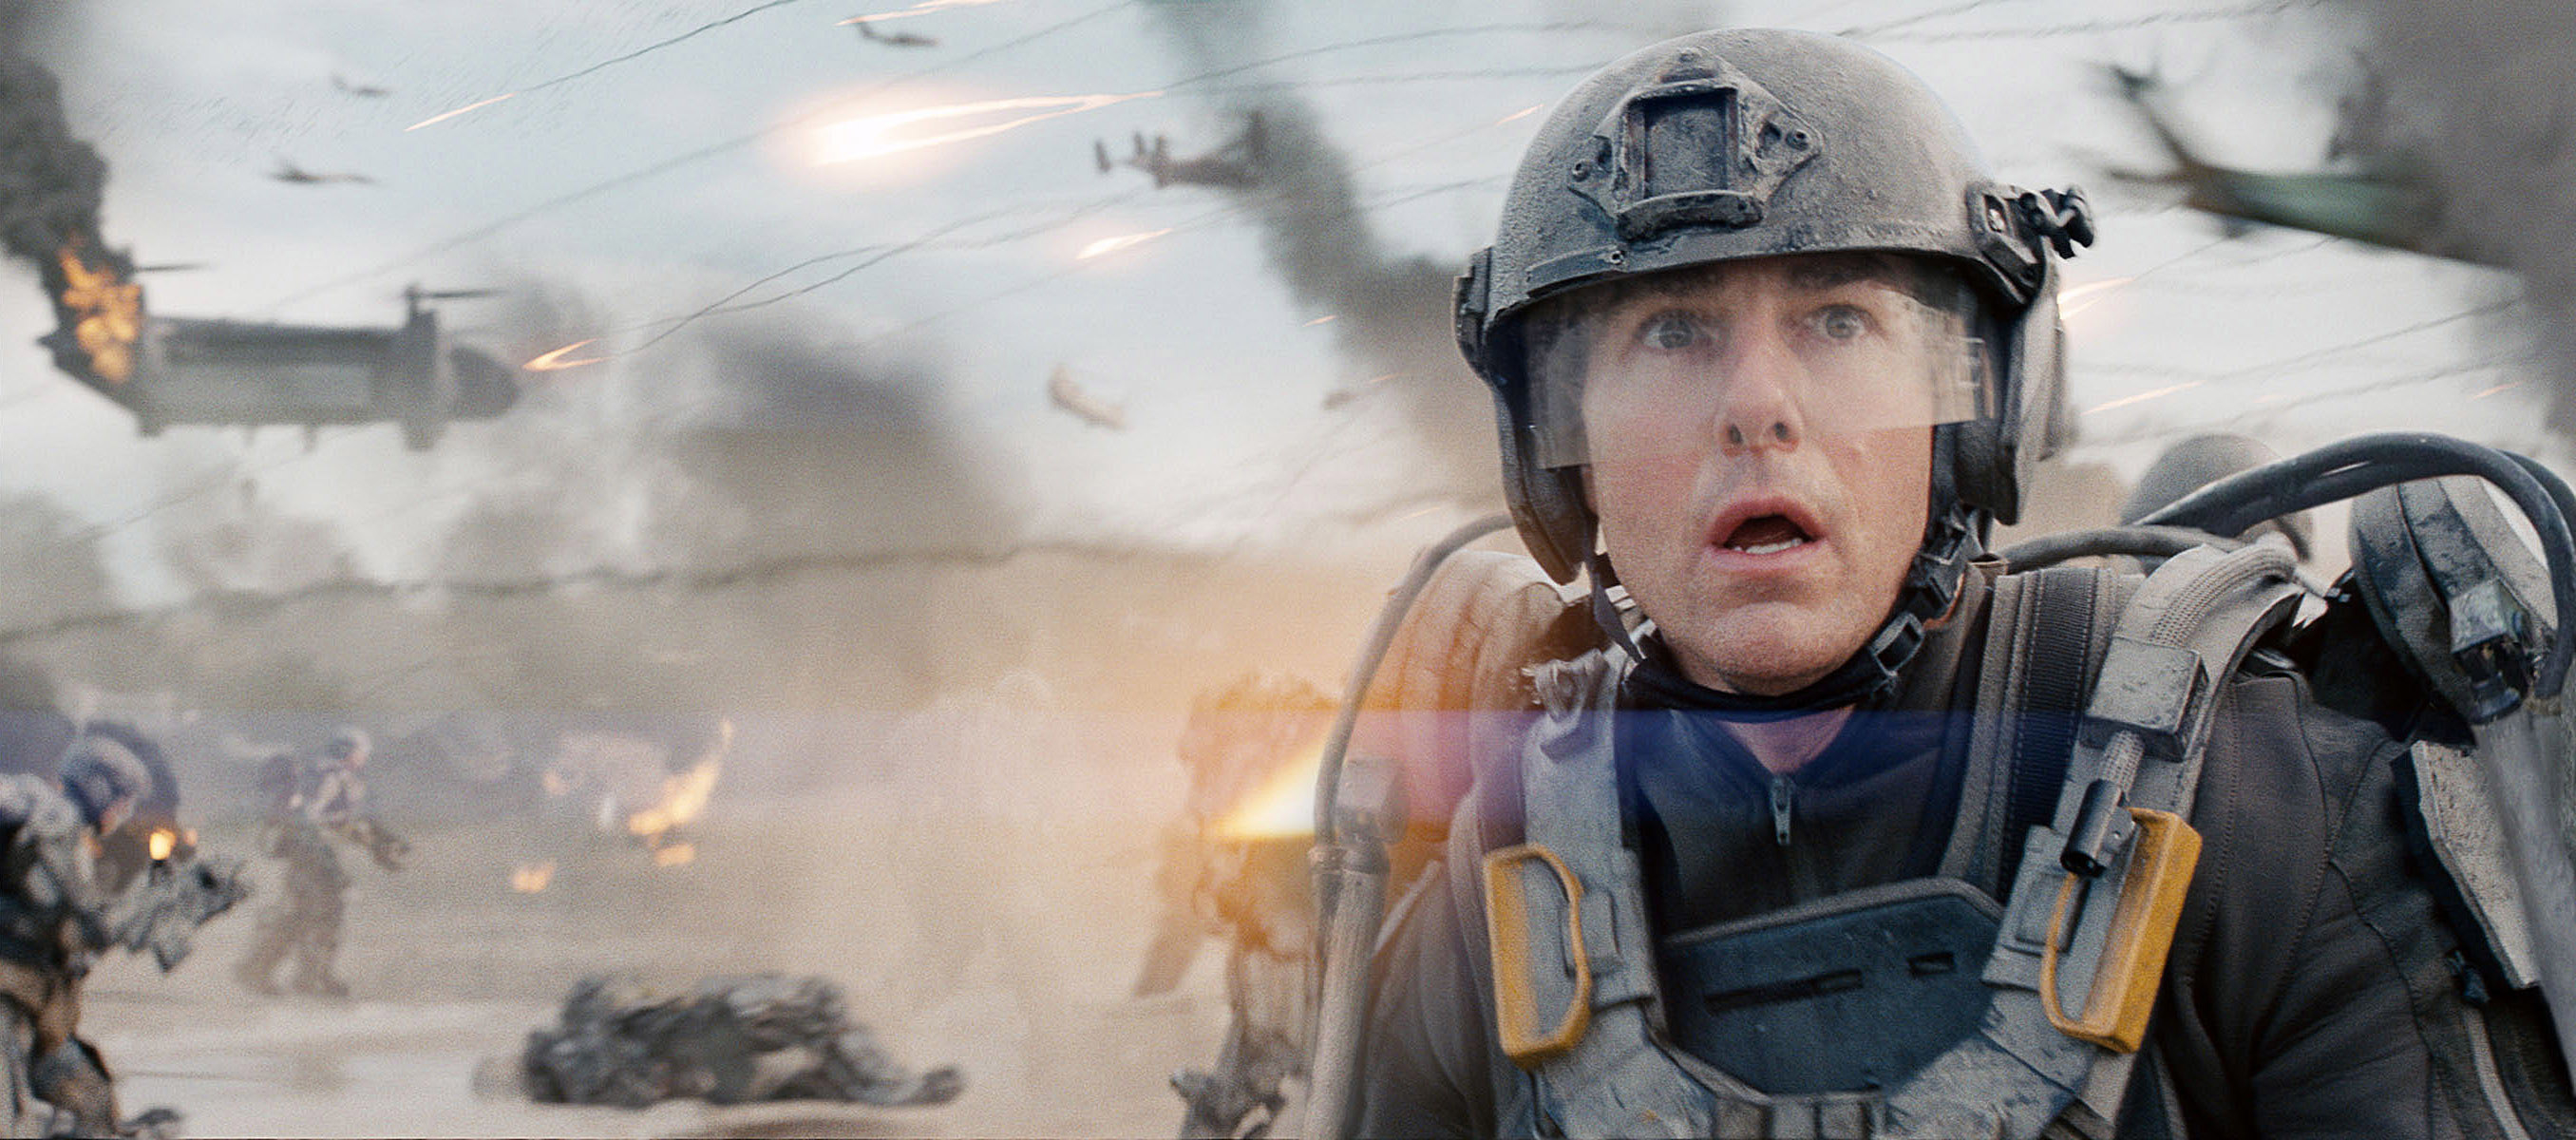 Tom Cruise in the middle of battle